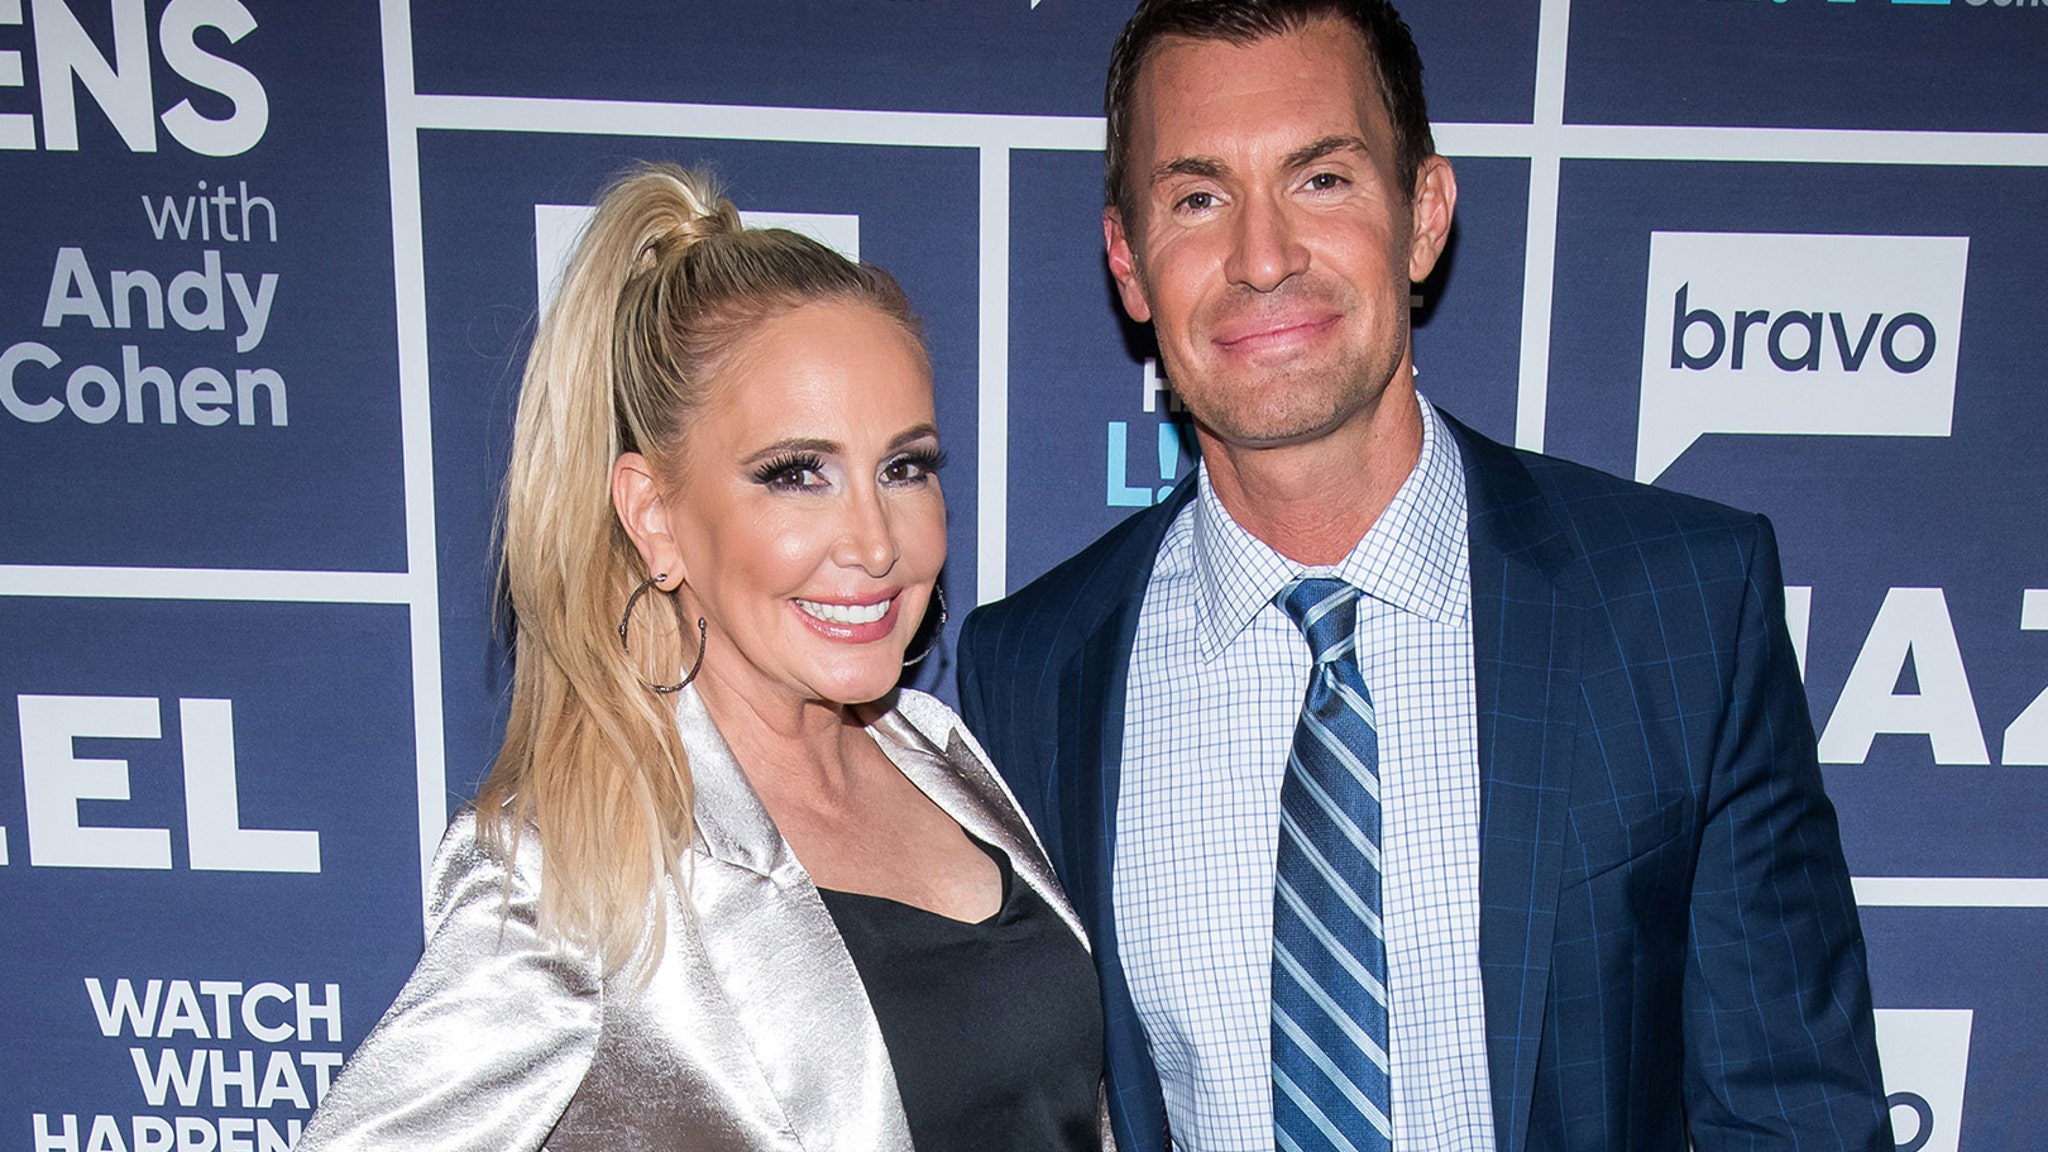 RHOC’s Shannon Beador Injured In DUI Hit-And-Run, Jeff Lewis Claims